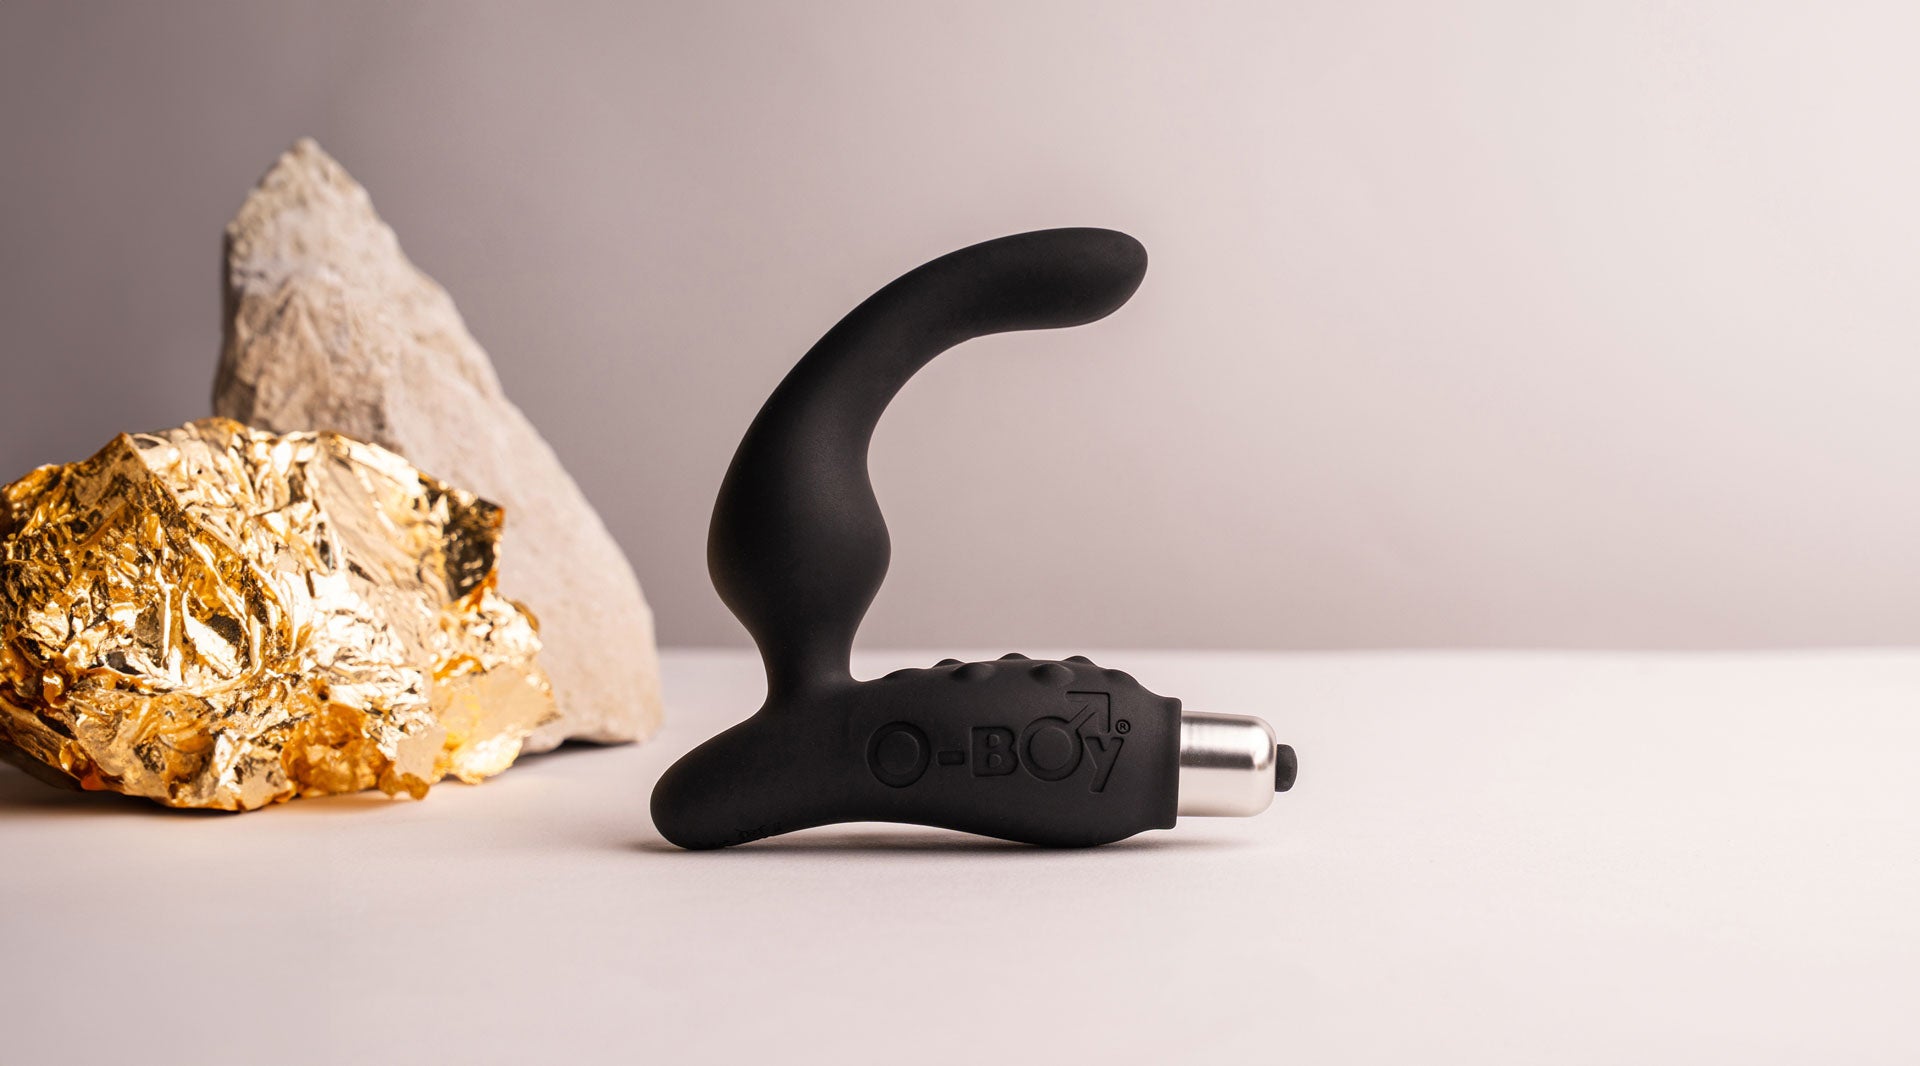 Silicone vibrating prostate massager with perineum pleasure points in black housing a removable bullet vibrator.